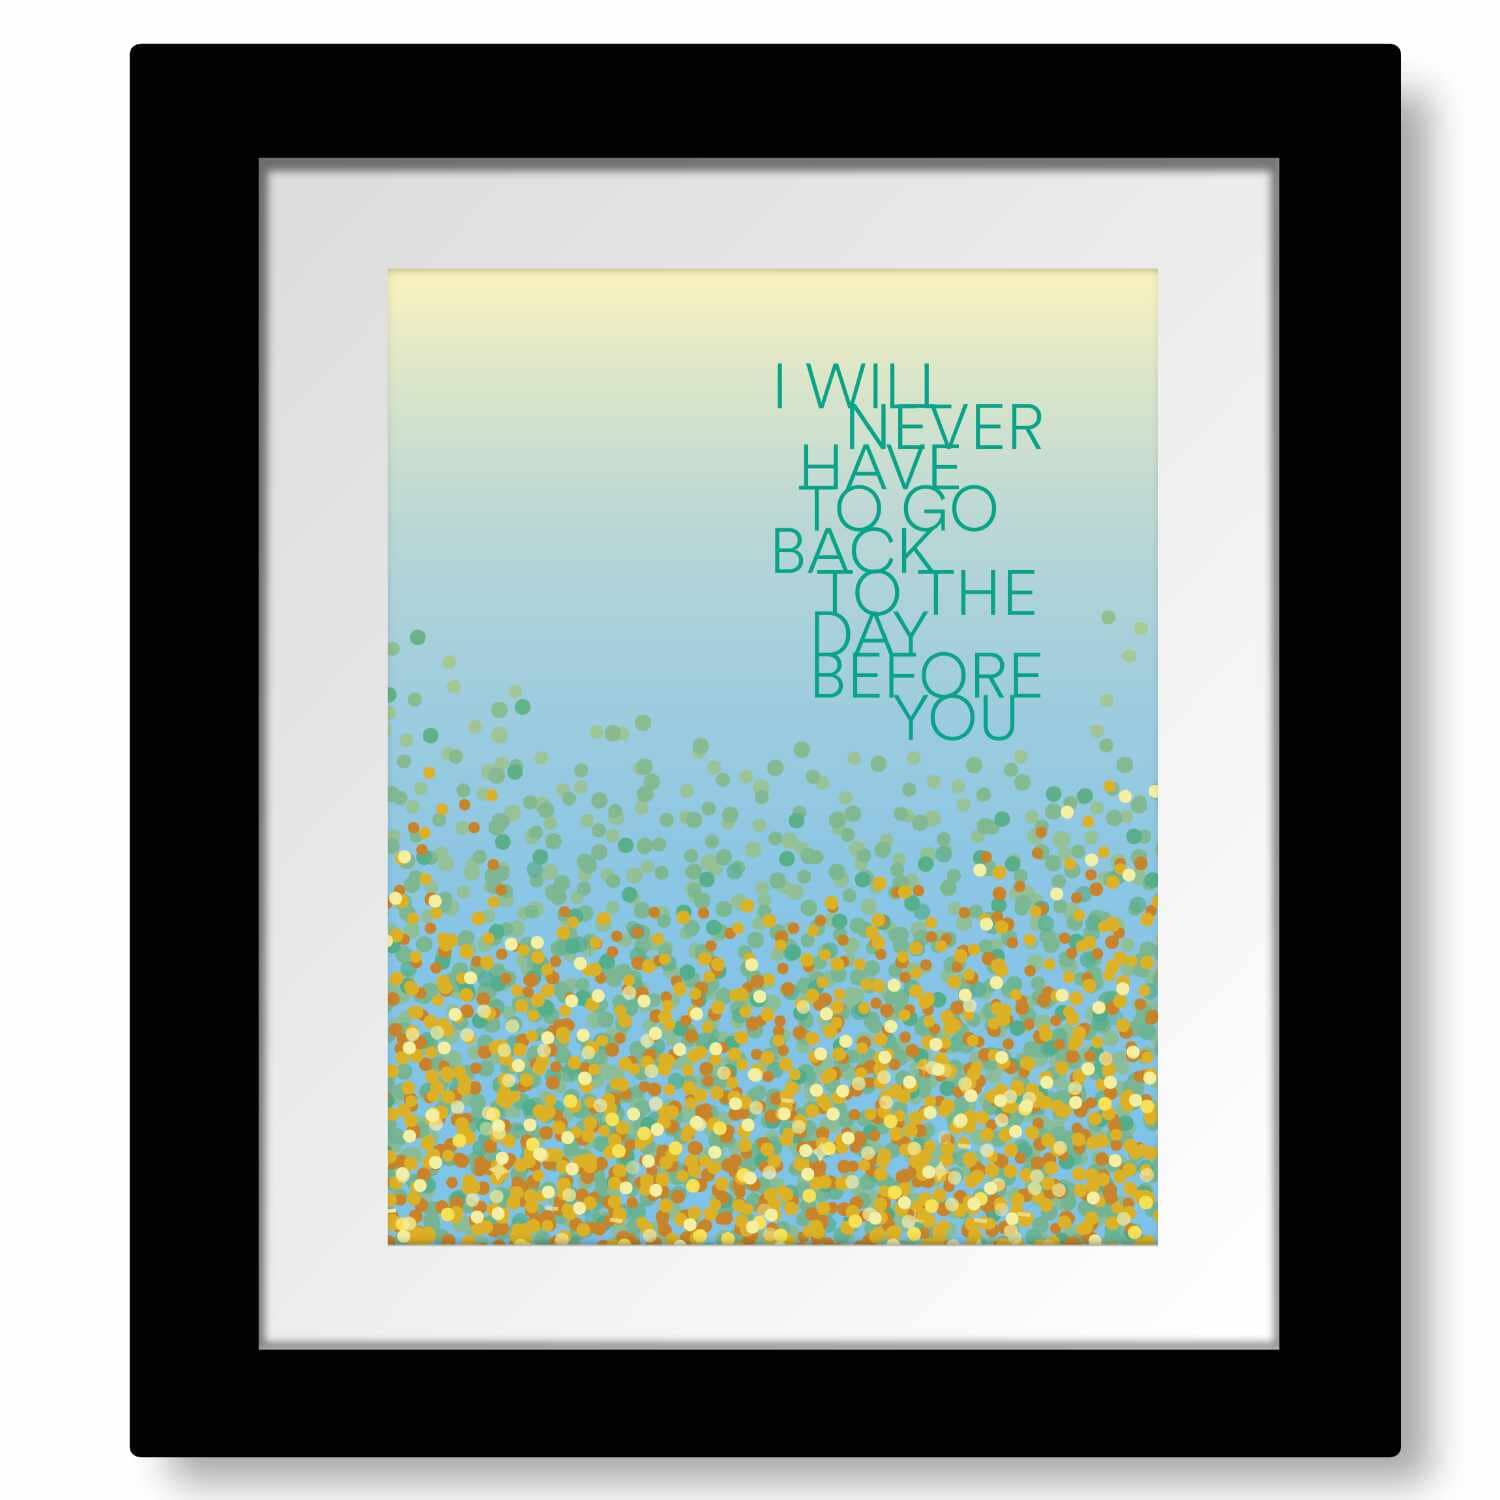 The Day Before You by Matthew West - Song Lyric Art Print Song Lyrics Art Song Lyrics Art 8x10 Matted / Framed Print 